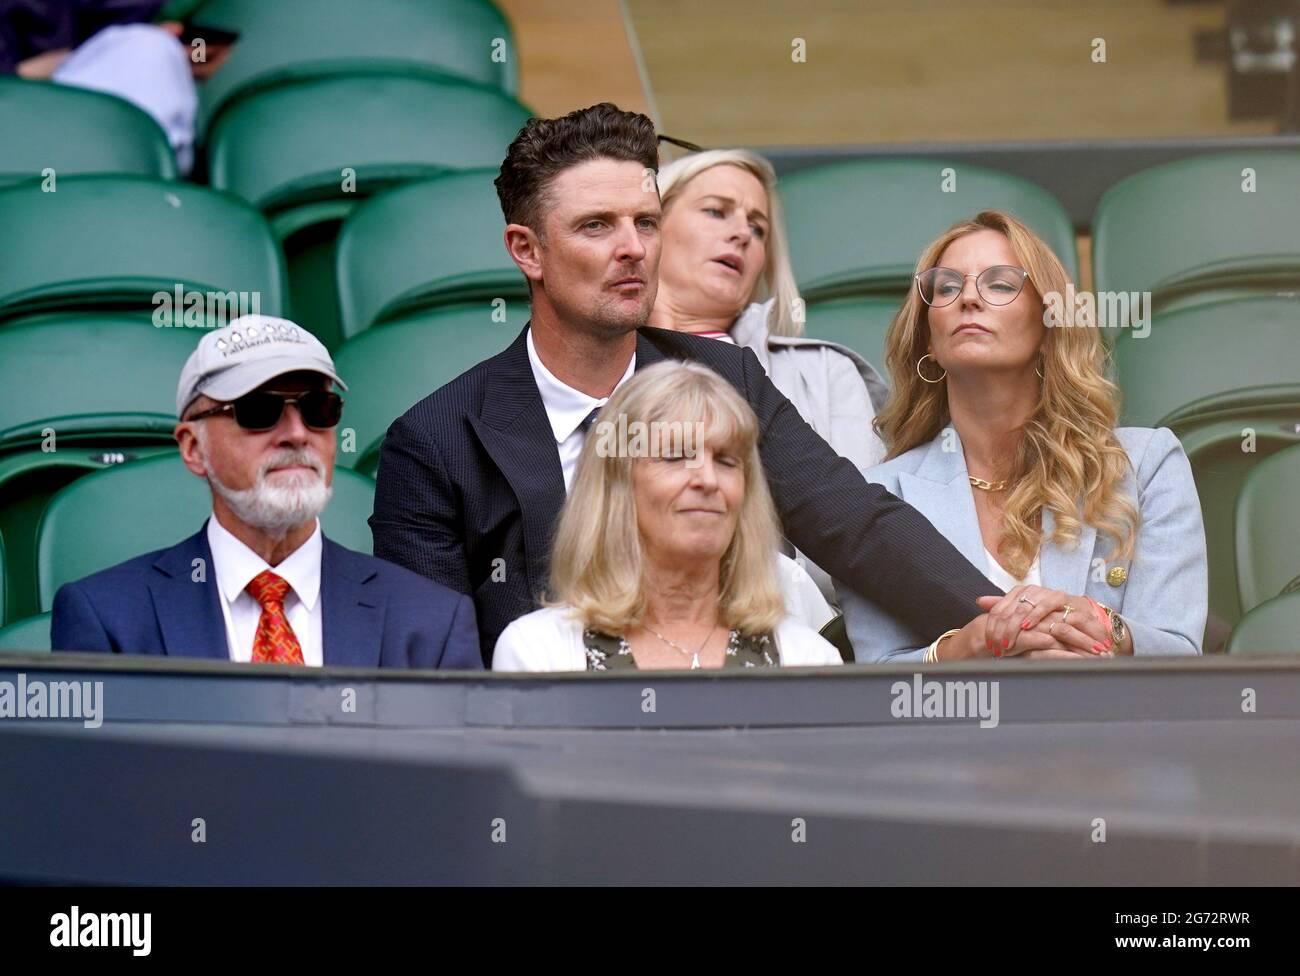 Justin Rose and Kate Phillips in the Royal Box as they watch the ladies'  doubles final between Elise Mertens and Hsieh Su-wei and Elena Vesnina and  Veronika Kudermetova on centre court on